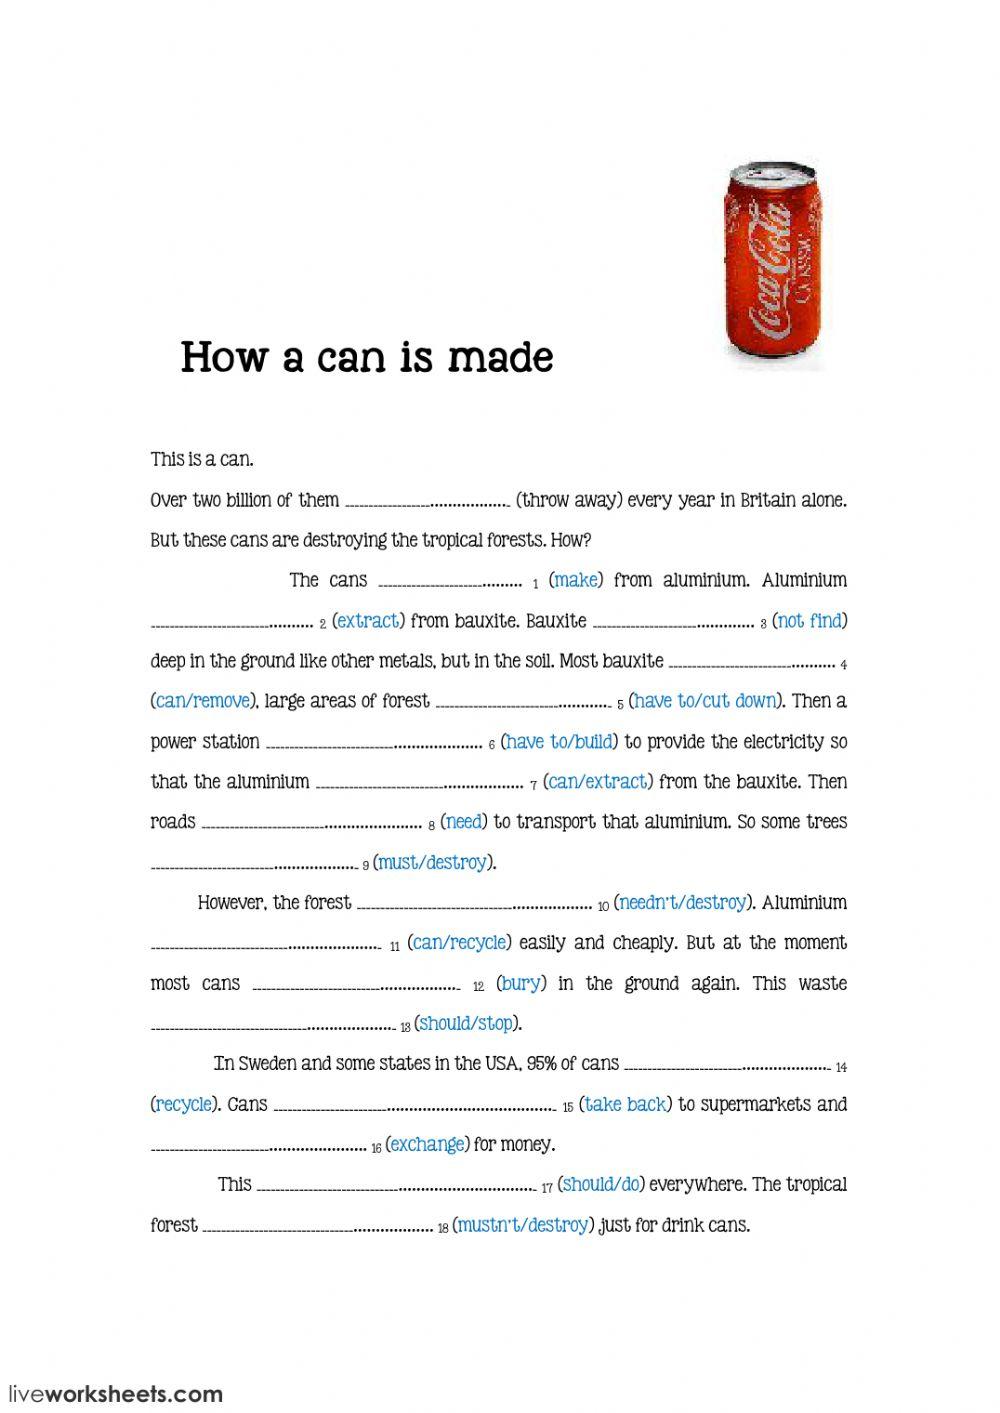 How a can is made